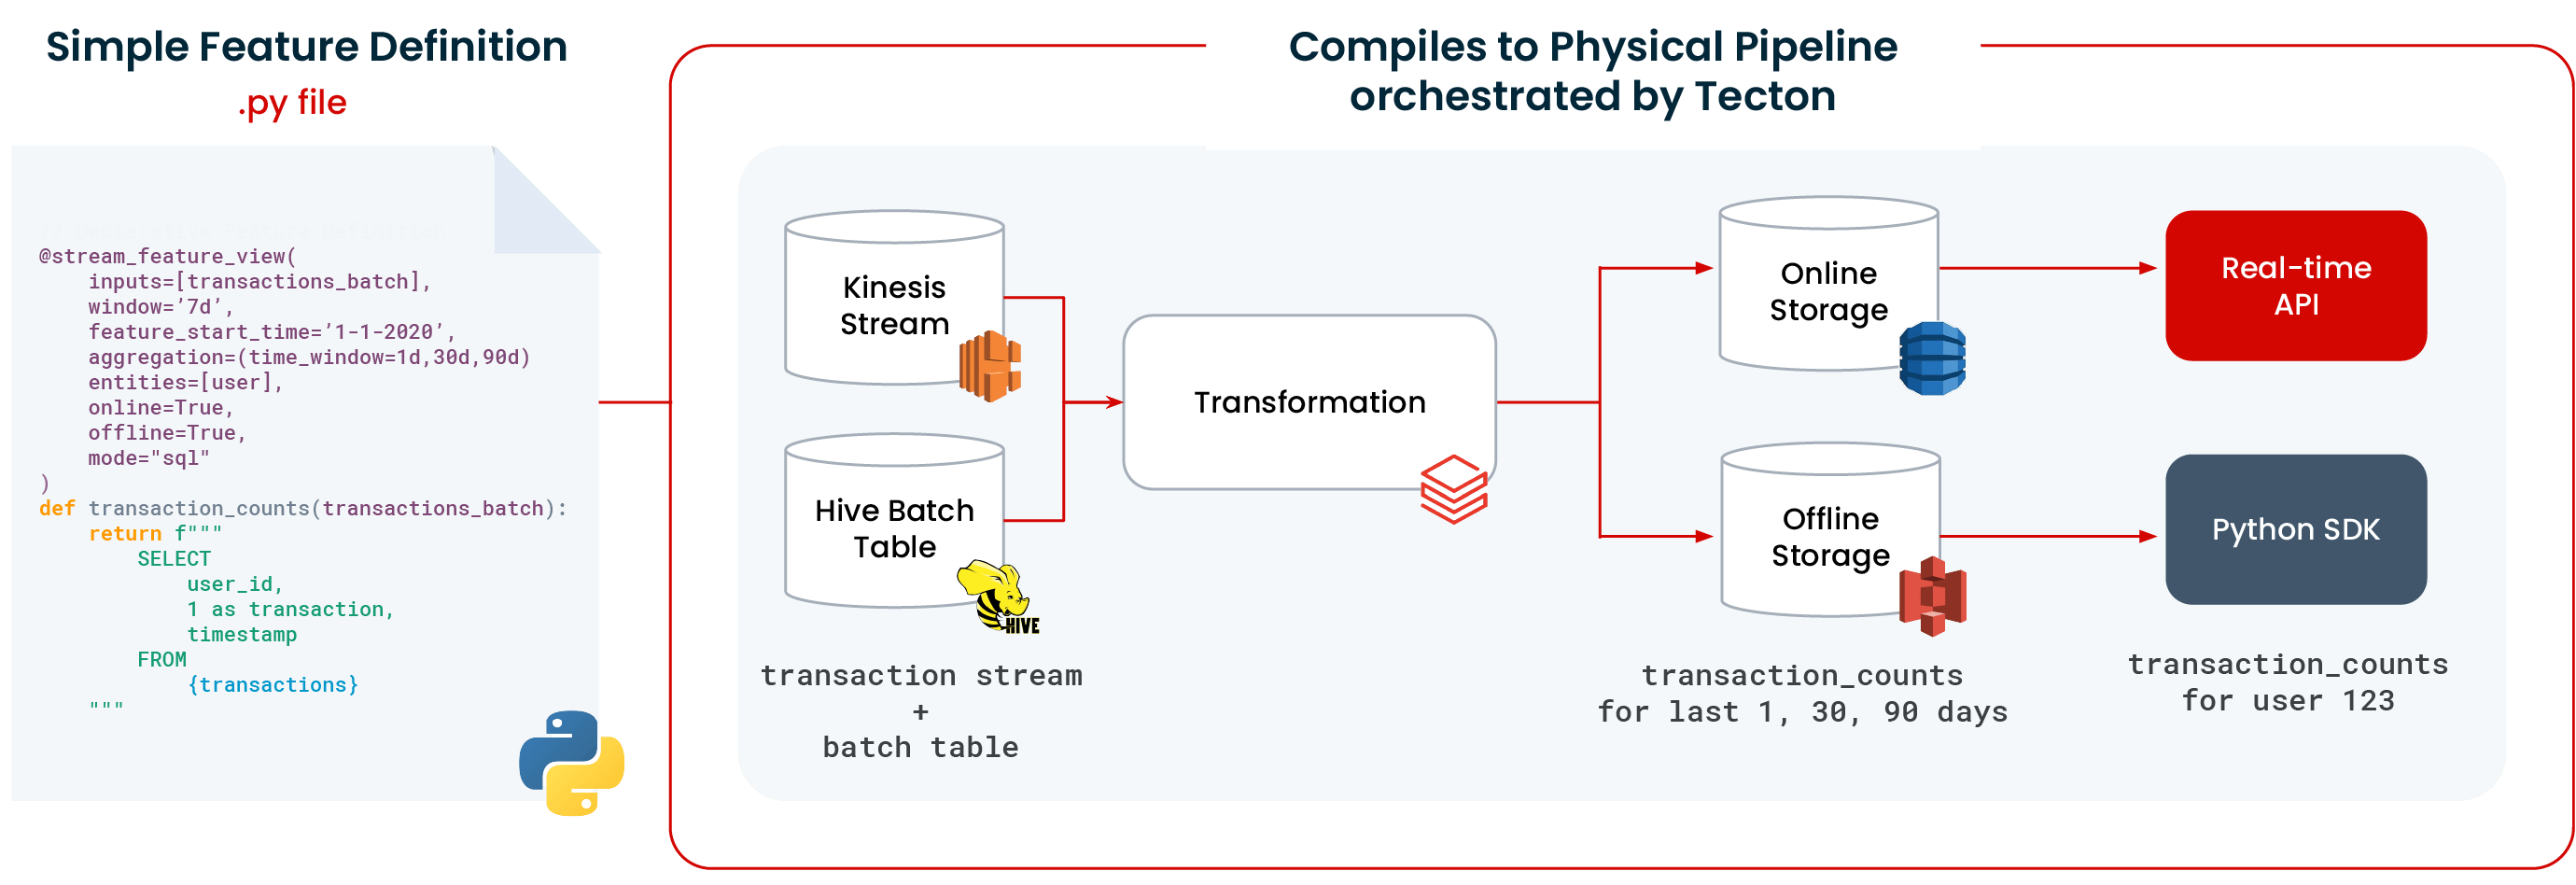 Image showing the simpler process of creating production-ready machine learning data pipelines in Tecton.